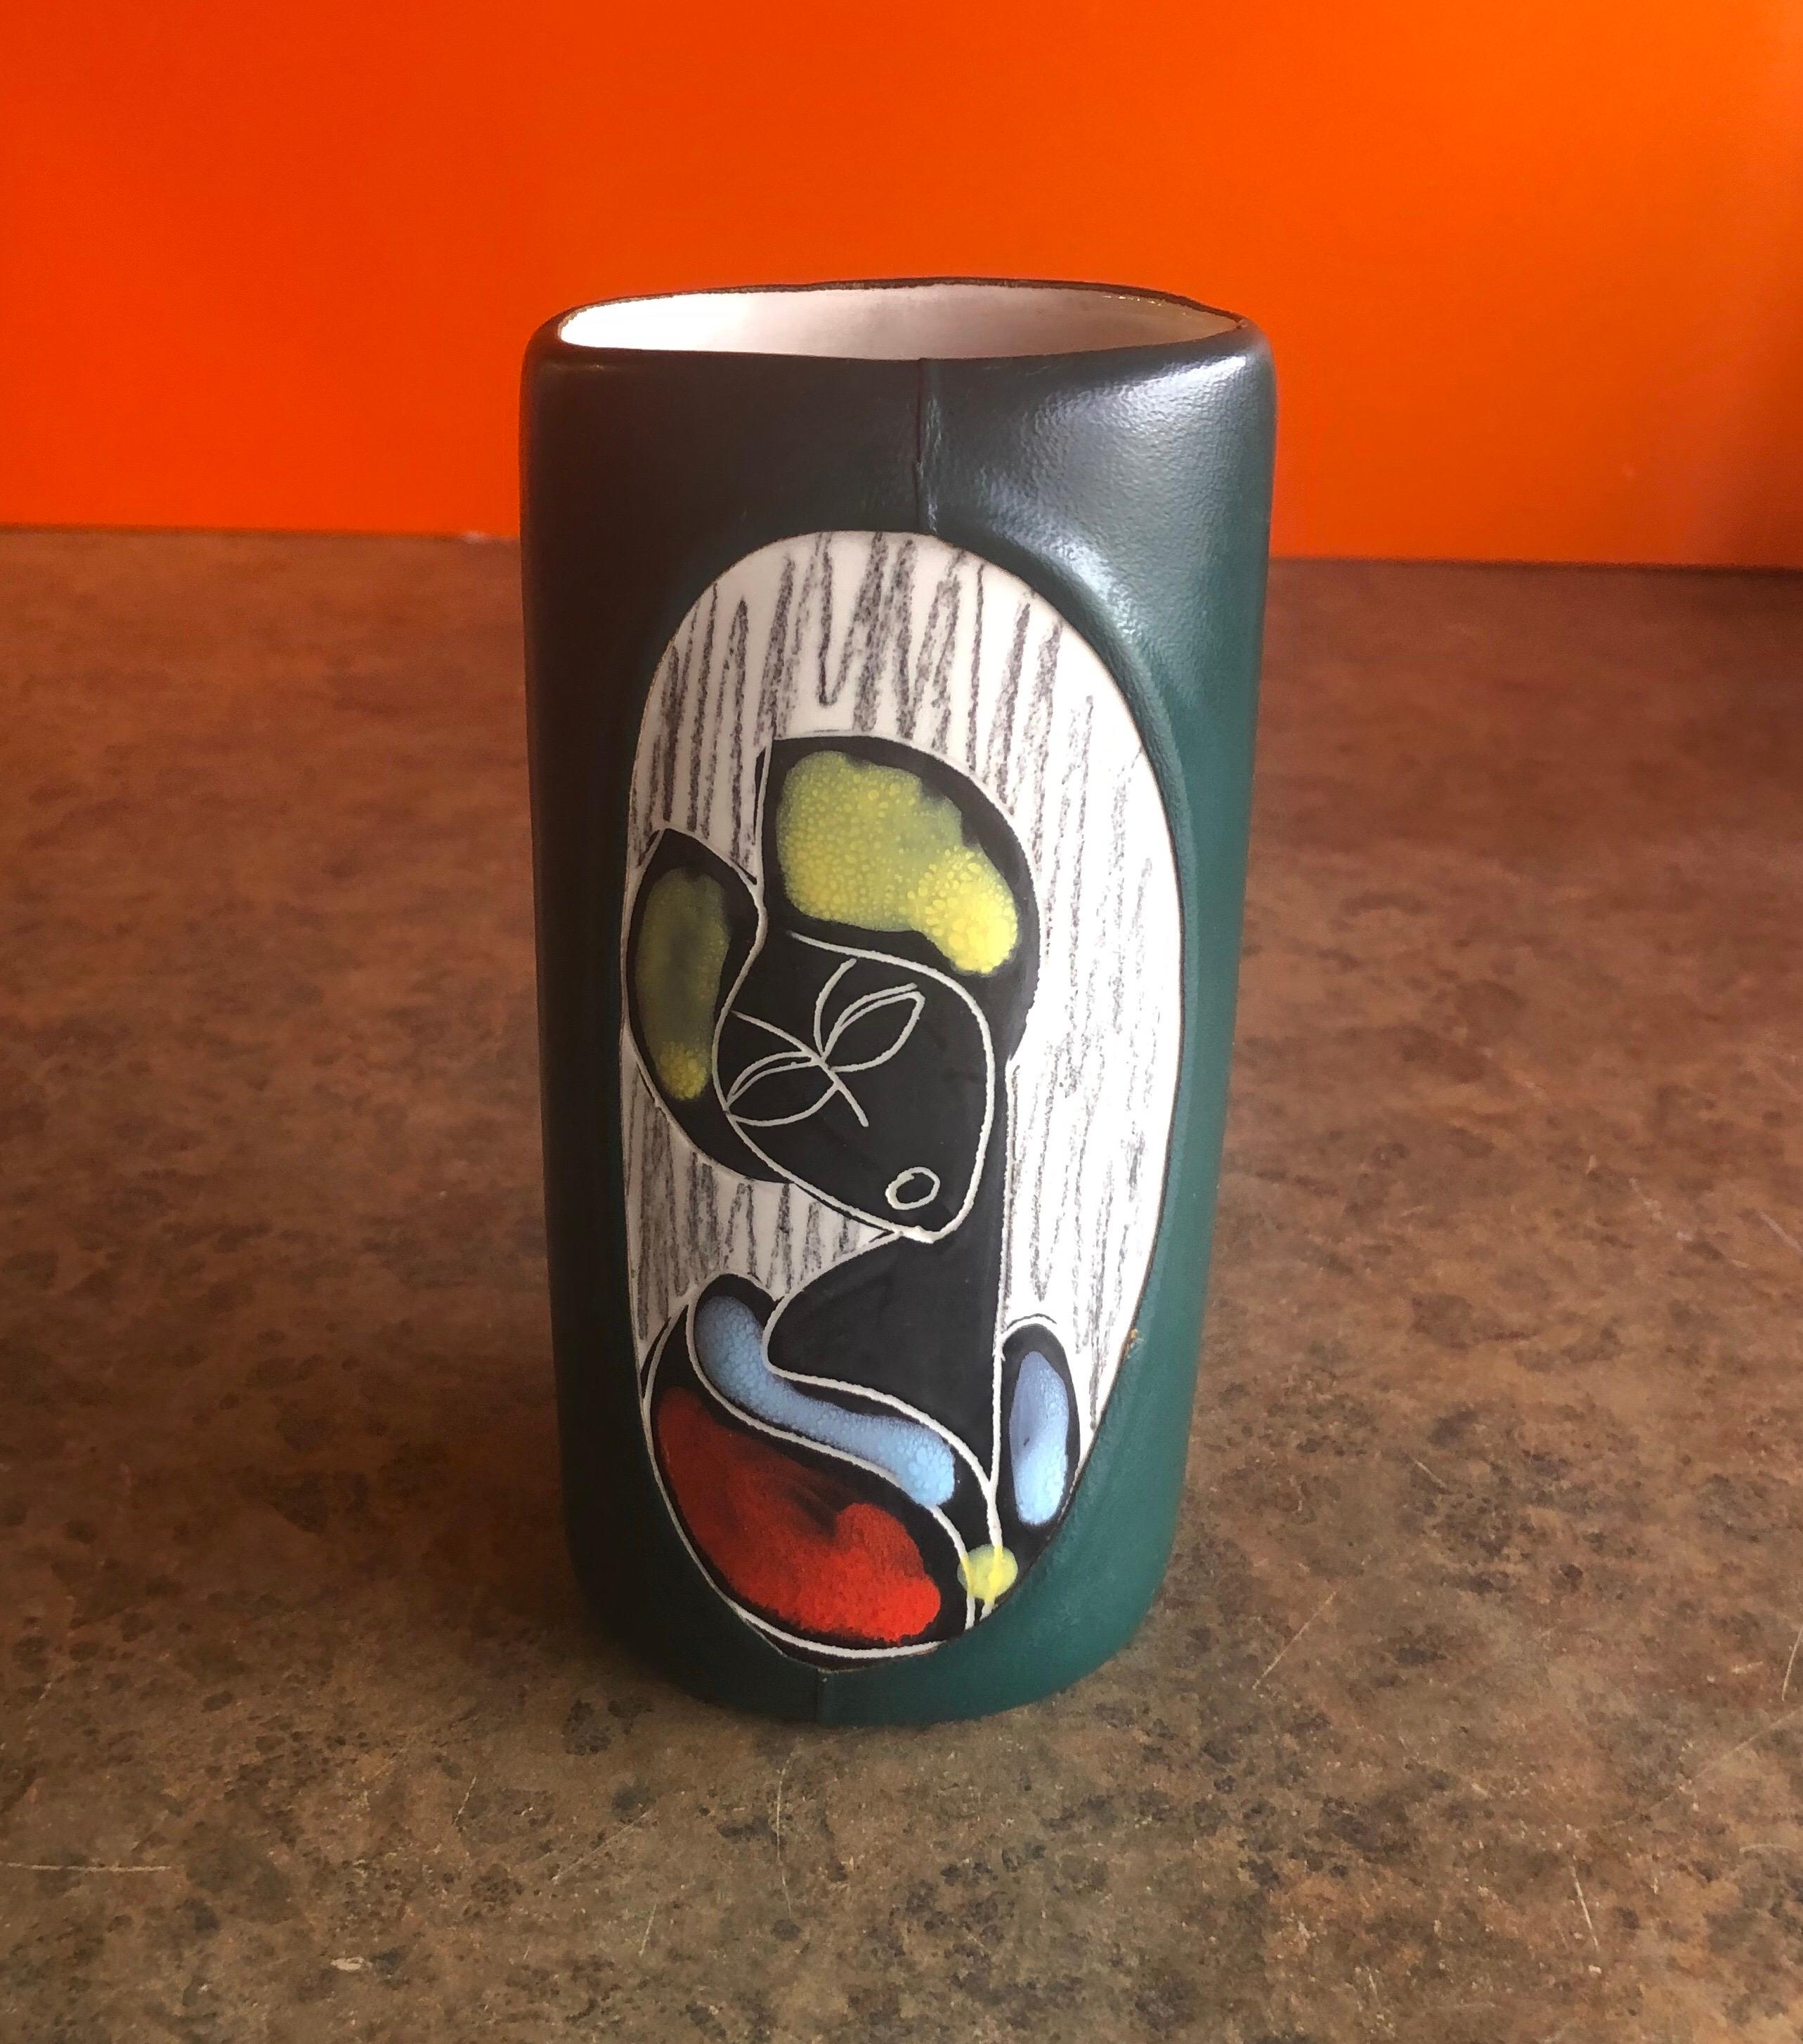 Mid-Century Modern Italian leather wrapped ceramic vase in the style of Marcello Fantoni, circa 1970s. The white ceramic vase is wrapped in forest green leather and has the image of a woman on the front side. It is 6